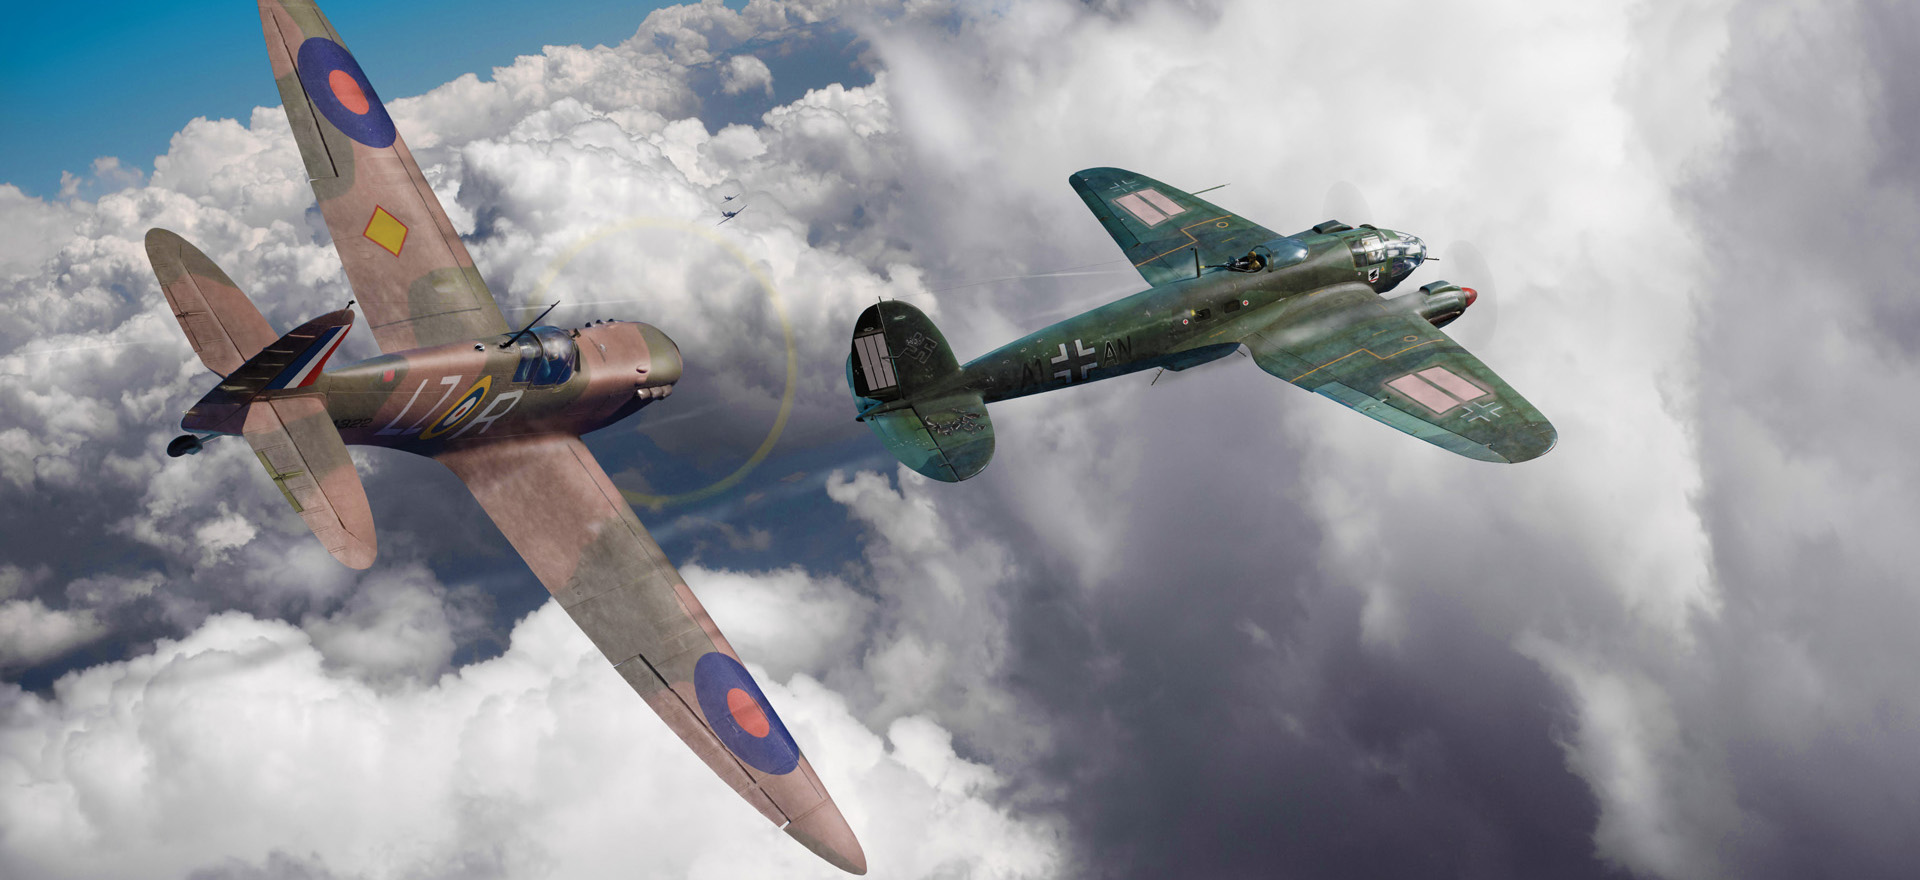 A Supermarine Spitfire fighter of the British Royal Air Force chases a German Heinkel He-111 bomber during a swirl of aerial combat in the Battle of Britain. Canadian pilot Howard Peter “Cowboy” Blatchford served with the RAF during the crucial battle and was later killed in action.